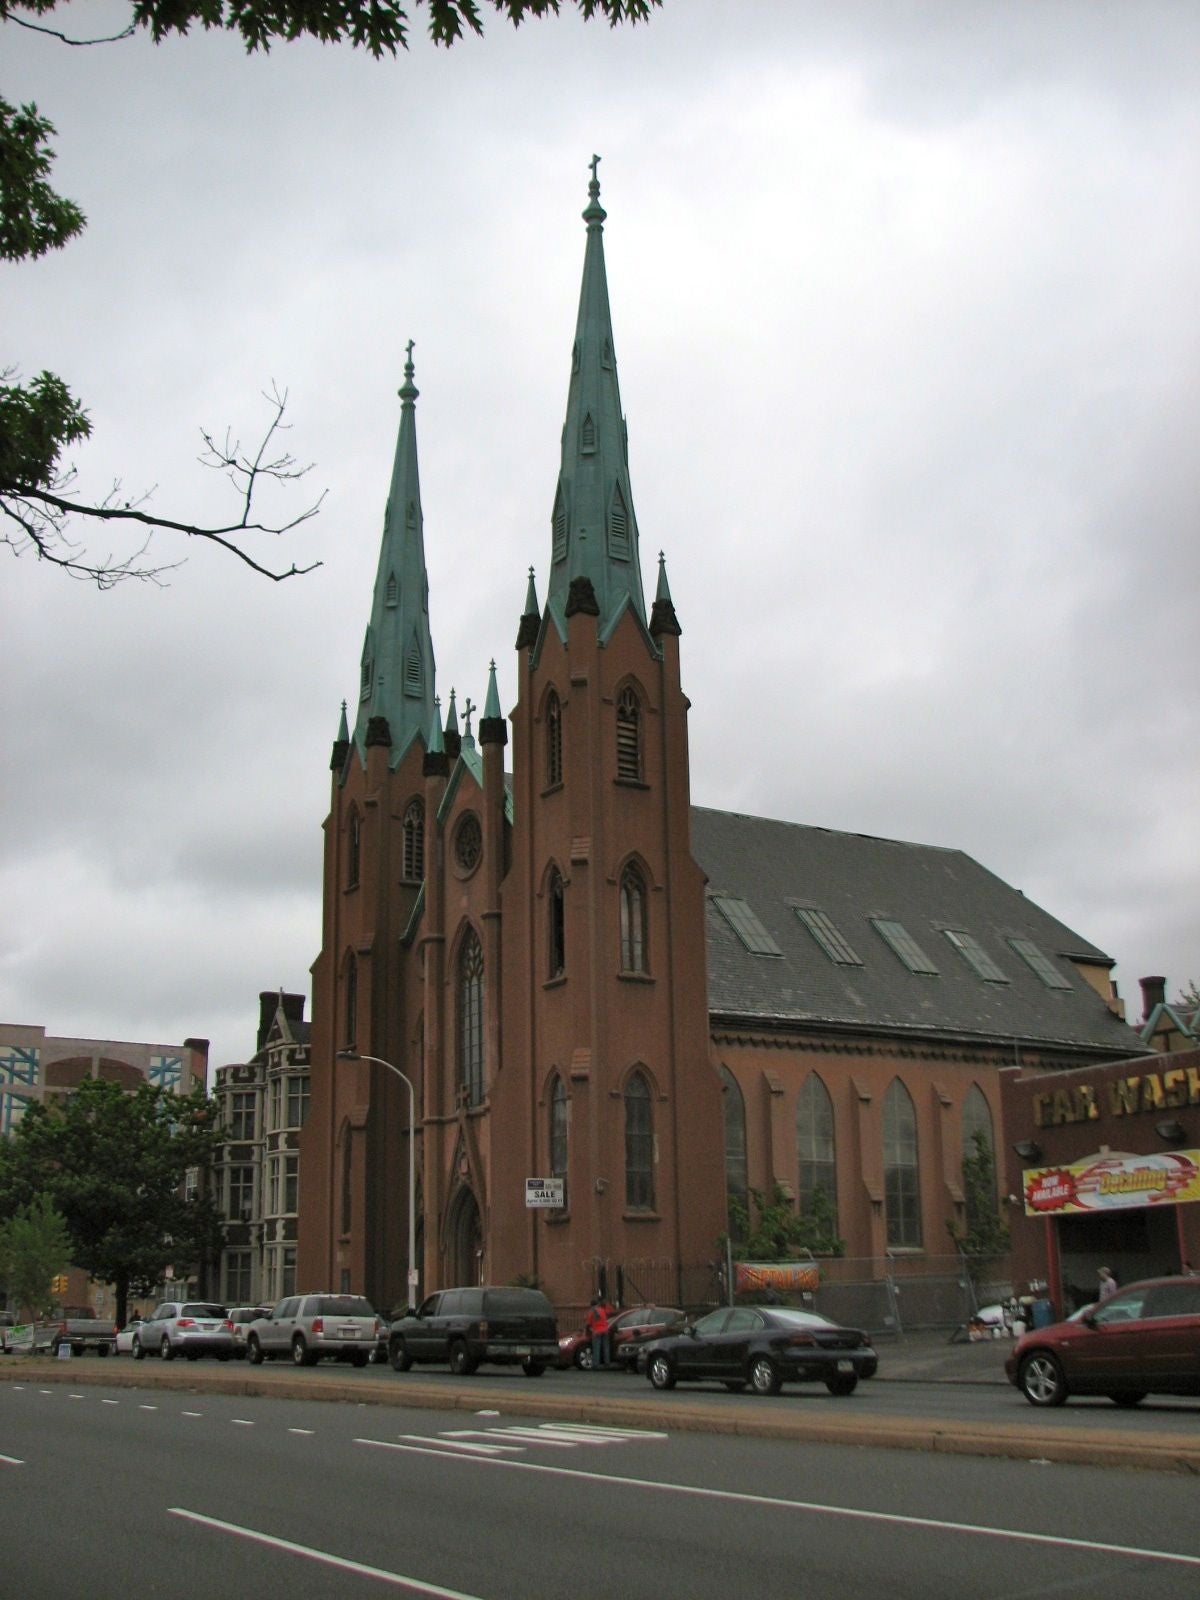 The twin spires of the Church of the Assumption on Spring Garden Street dwarf the former school building next door.